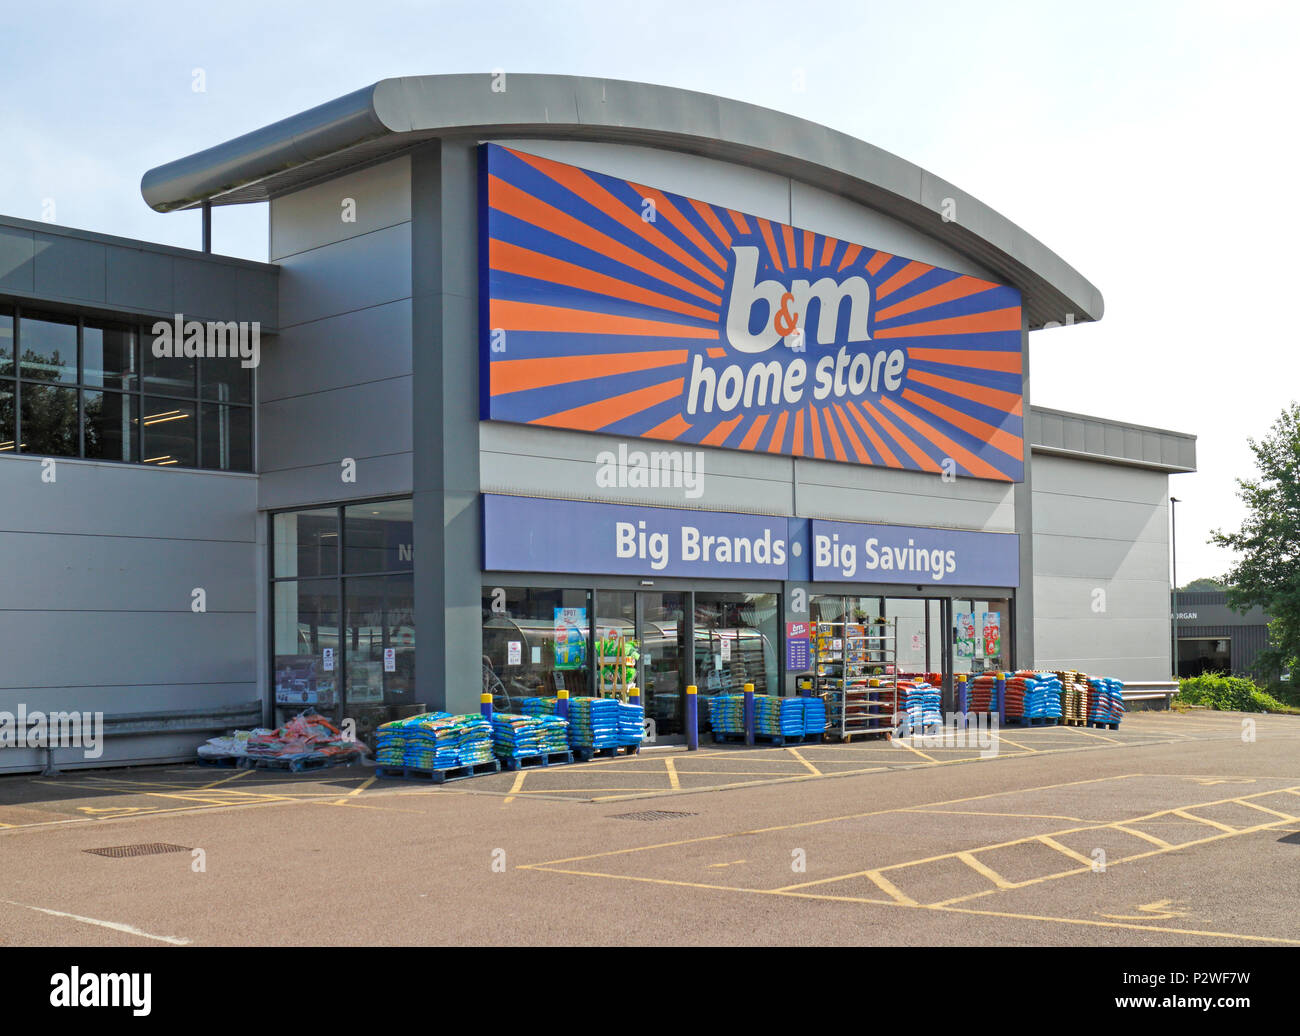 A view of the B&M home store storefront in Norwich, Norfolk, England, United Kingdom, Europe. Stock Photo